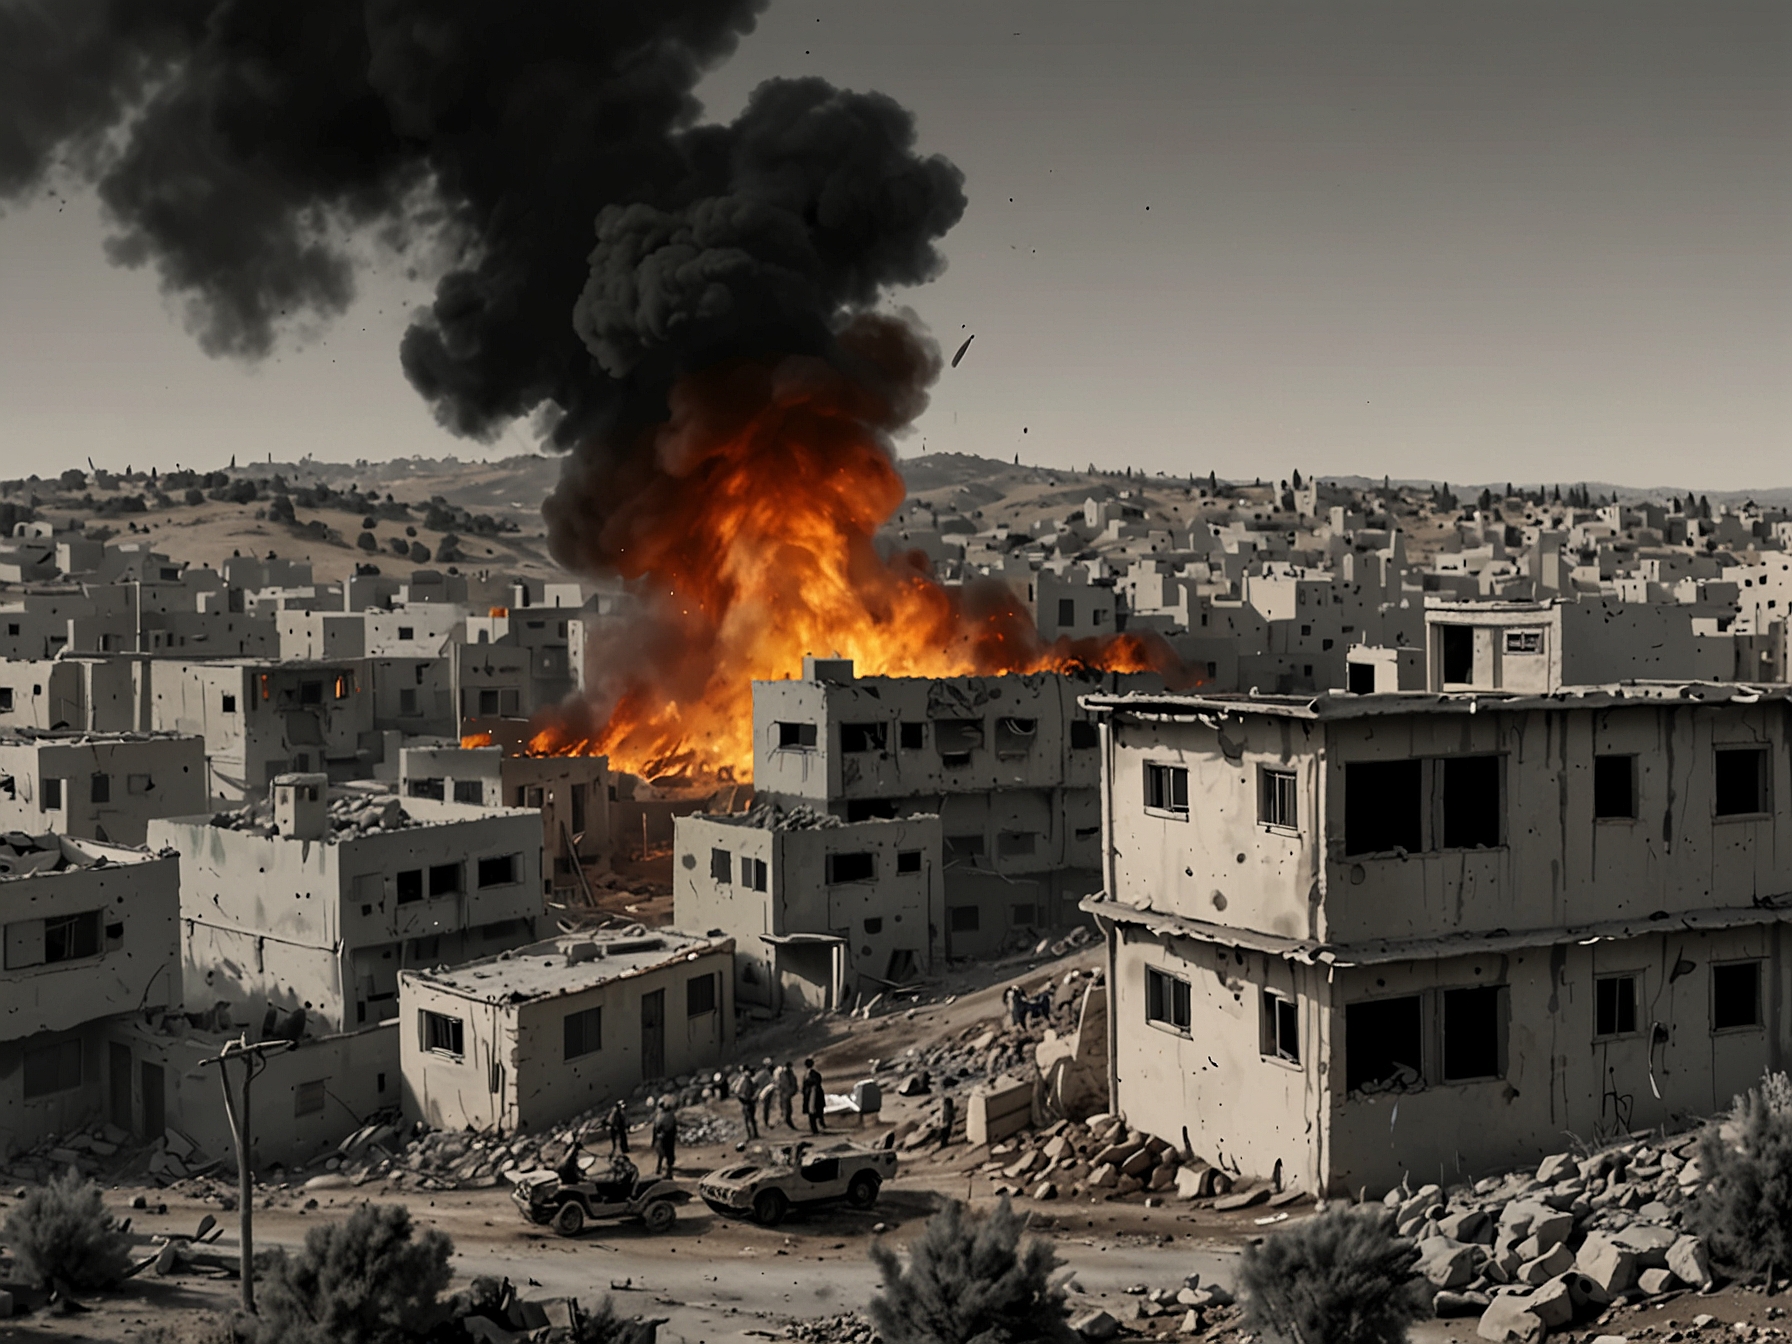 An image depicting the aftermath of a Hezbollah rocket attack on an Israeli settlement near the northern border. Smoke rises from damaged buildings, and residents are seen taking refuge.